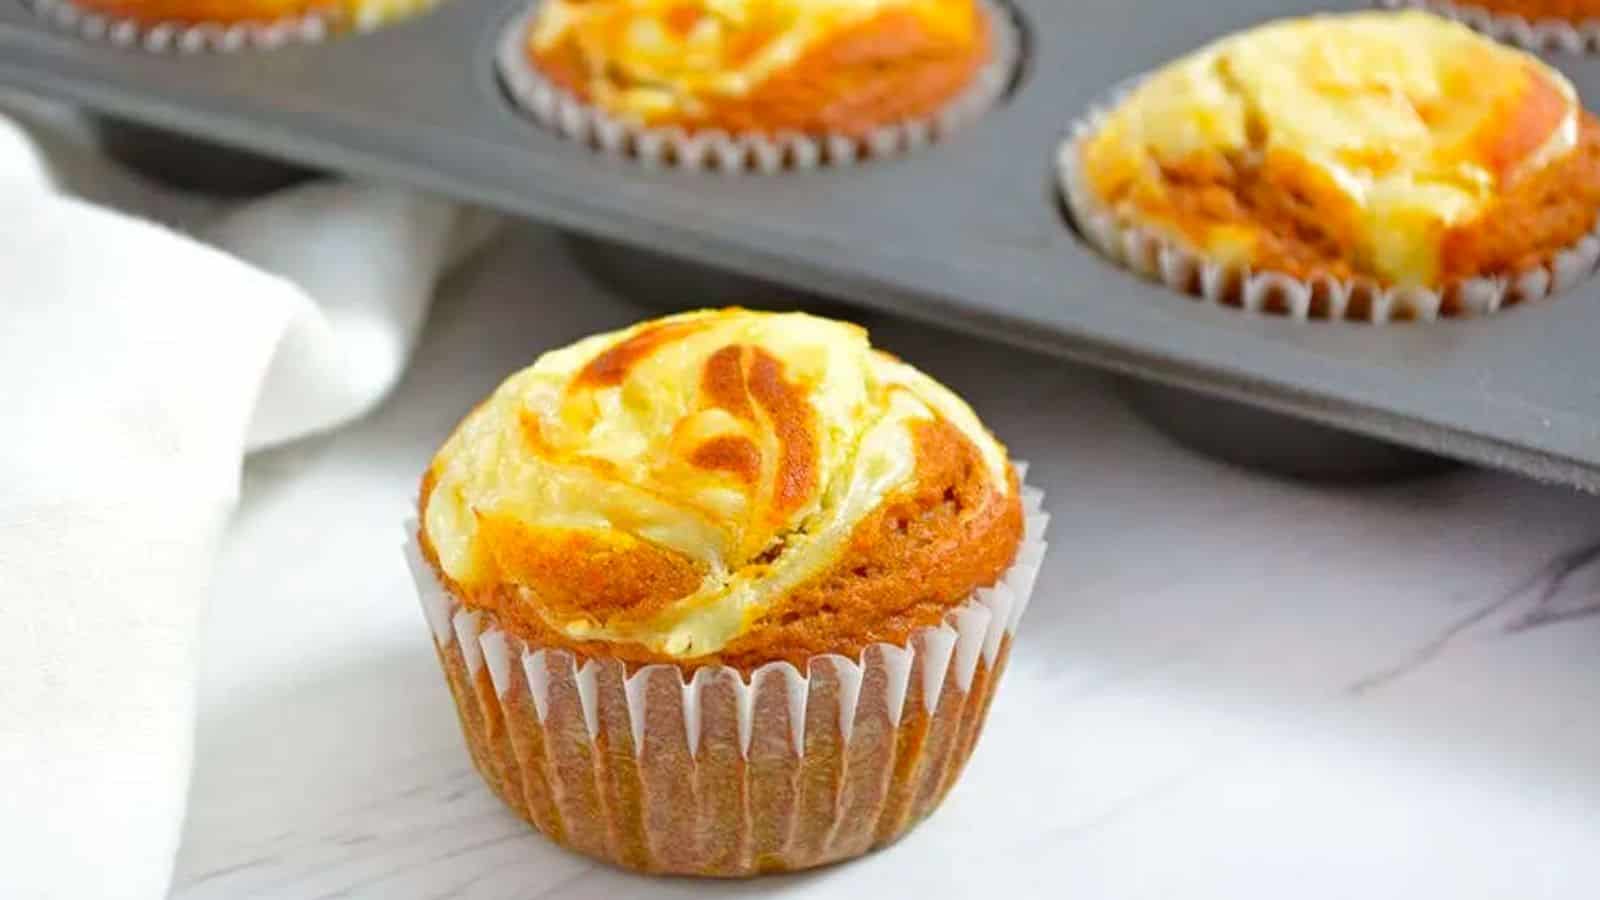 Pumpkin cream cheese muffin with a bite taken out of it.